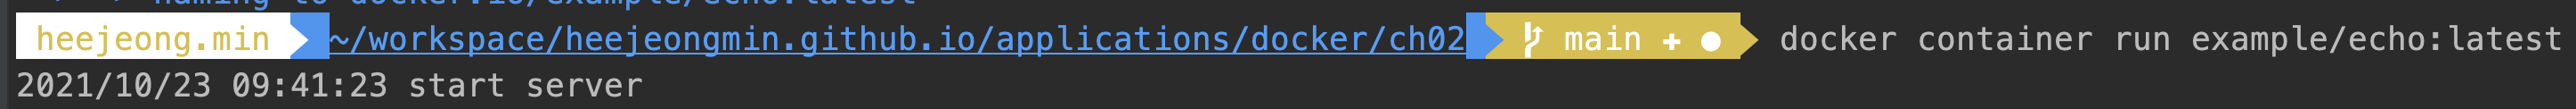 docker_container_run_foreground.png